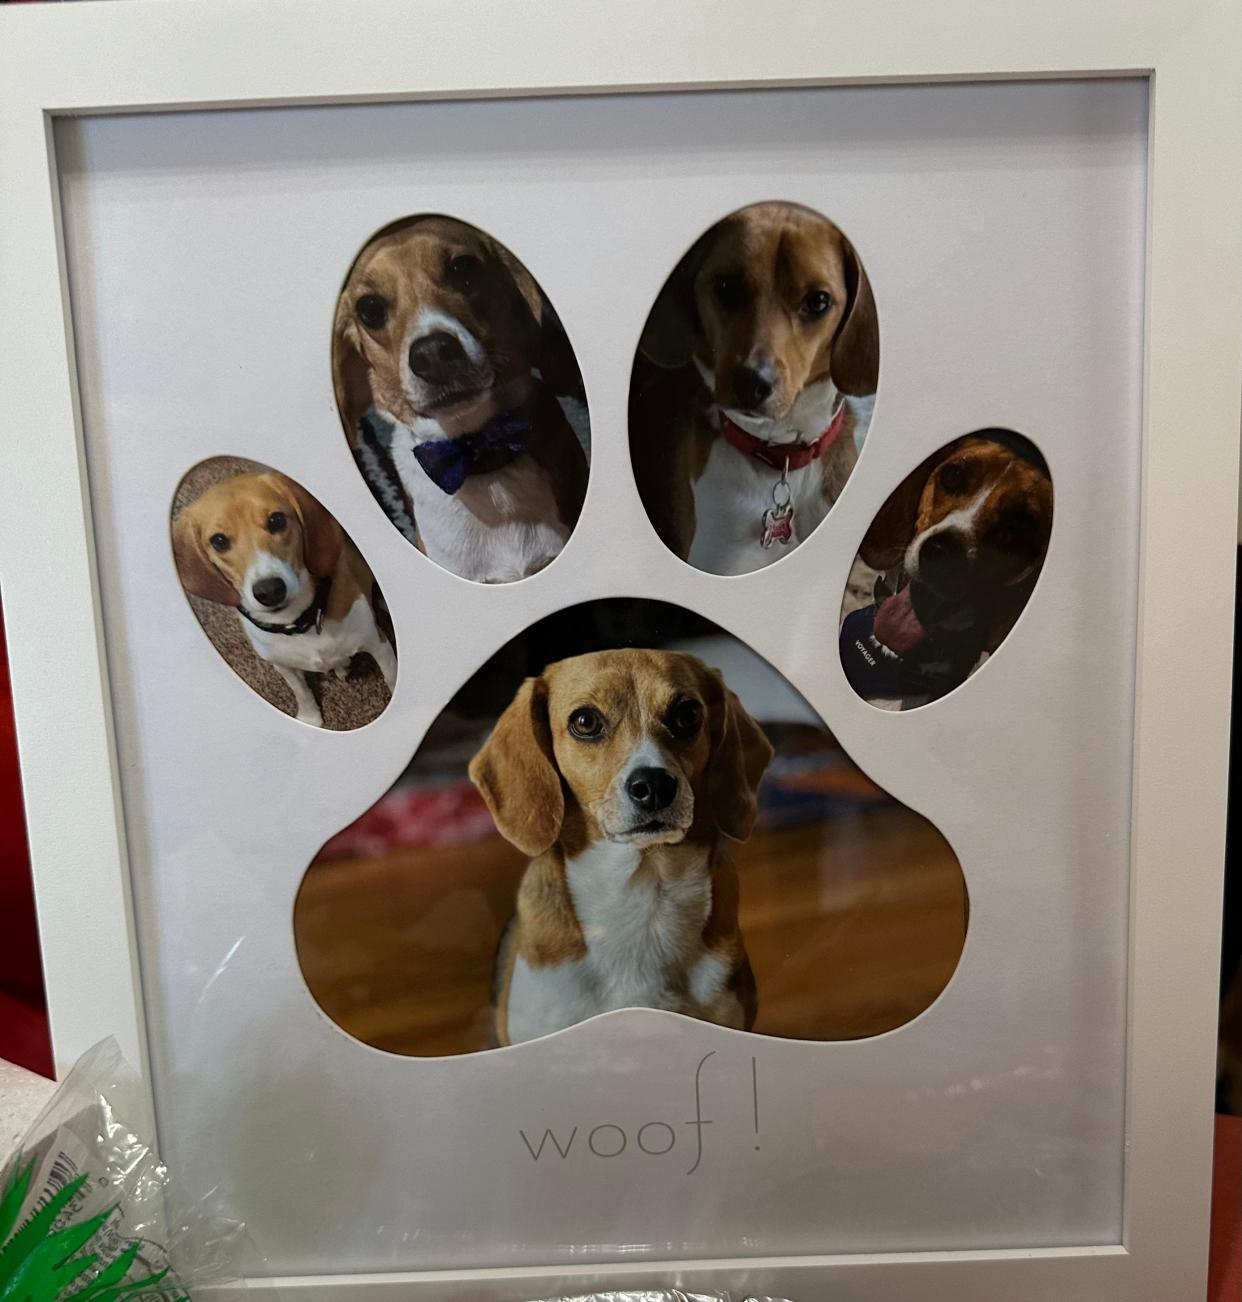 The beagles have been adopted by loving families.